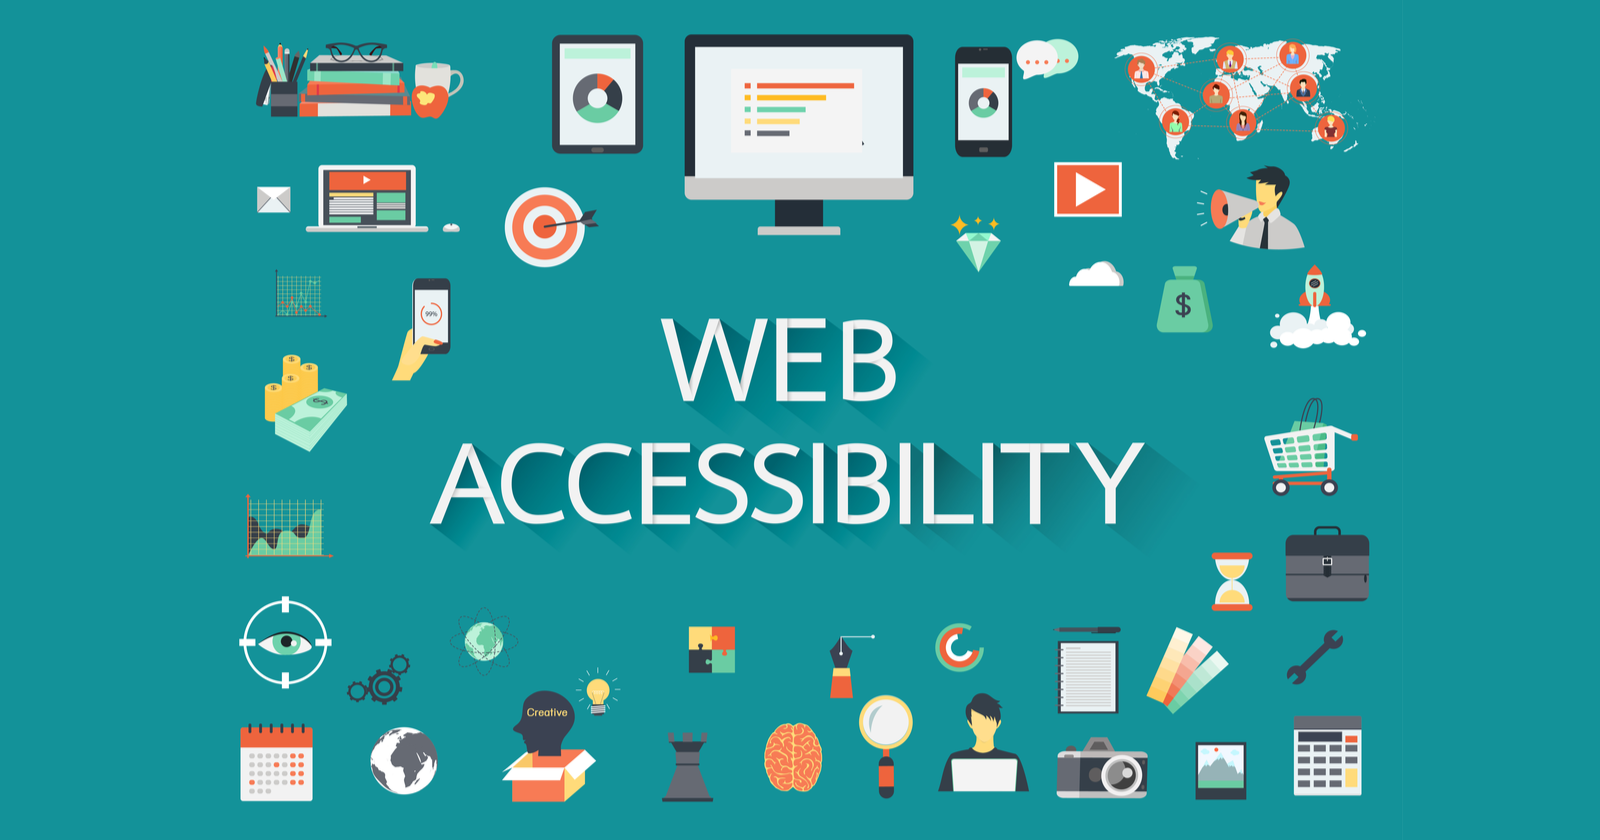 Web Accessibility - Make Your Contents More Accessible To Everyone For Your Business